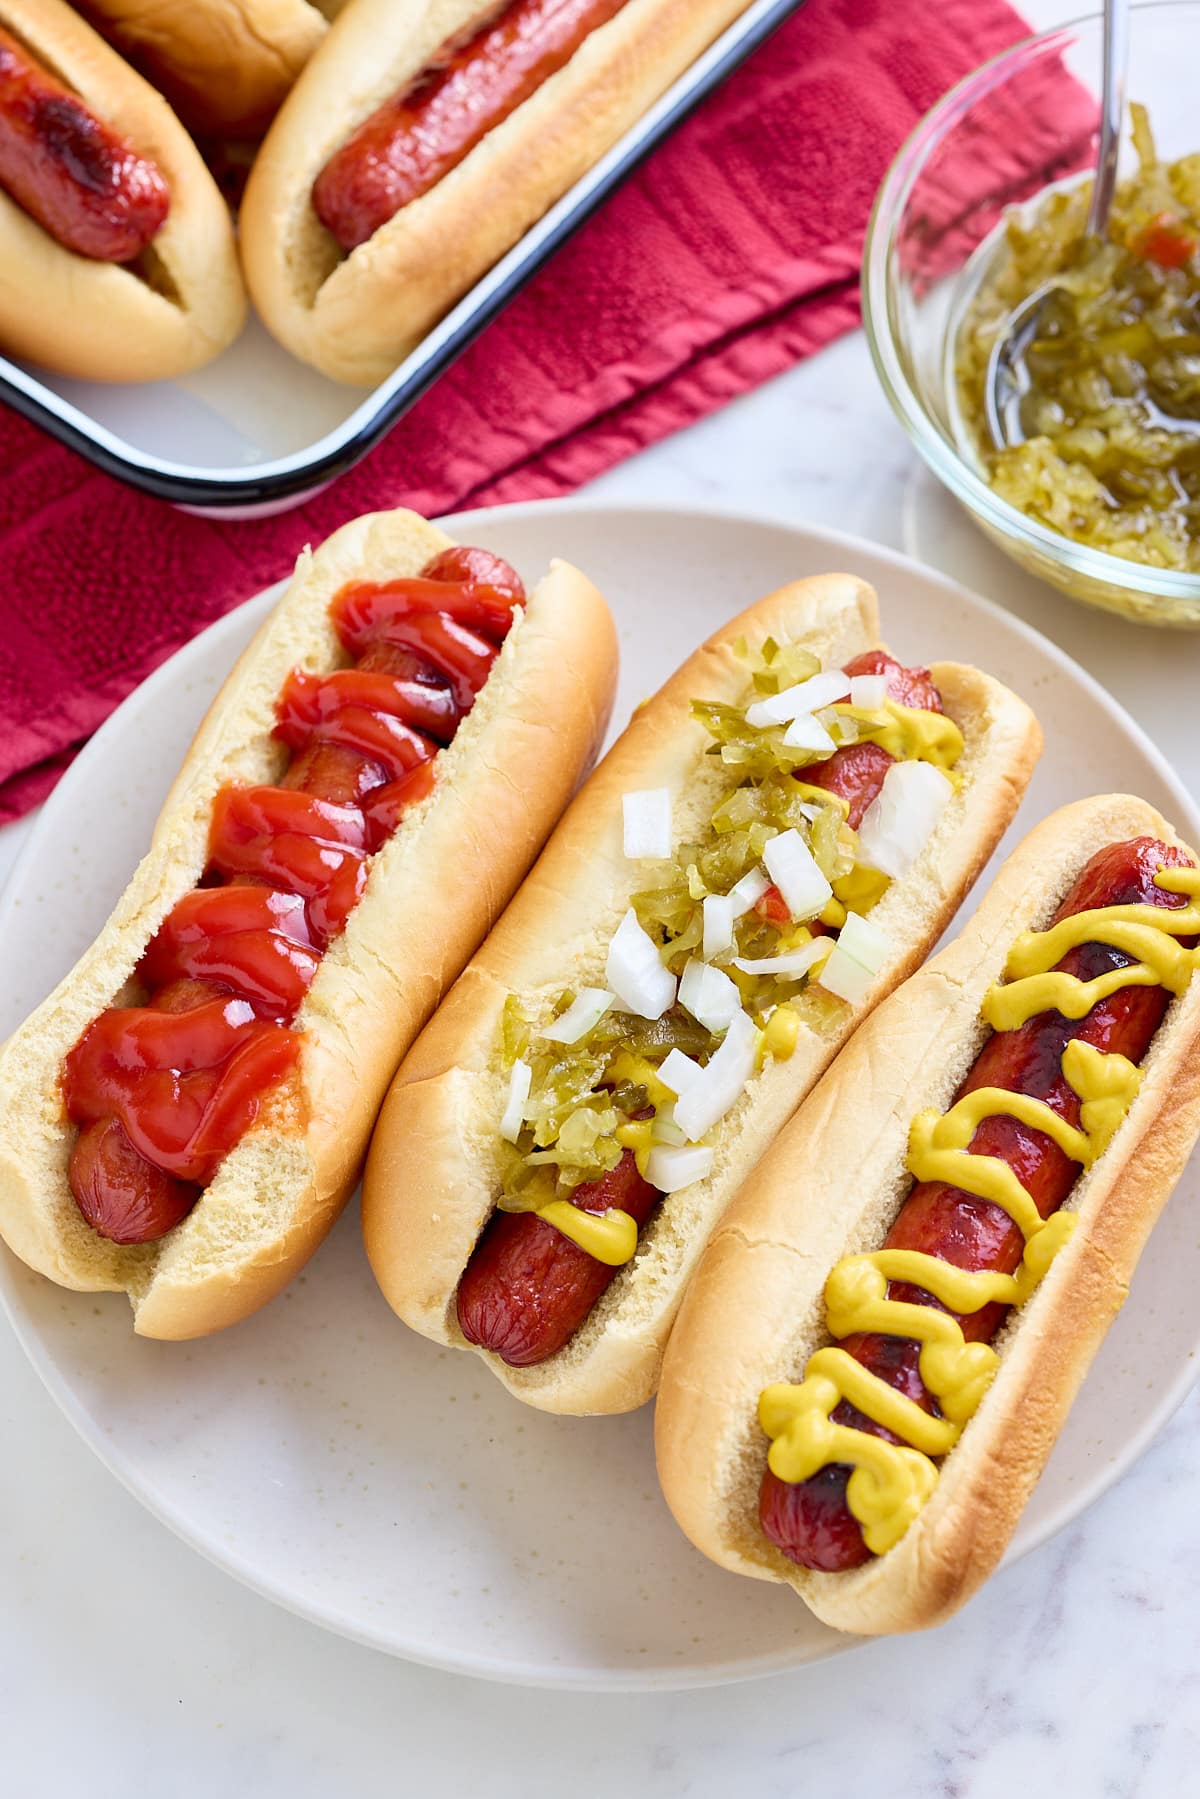 oven baked hot dogs in hot dog buns with a variety of toppings and sauces